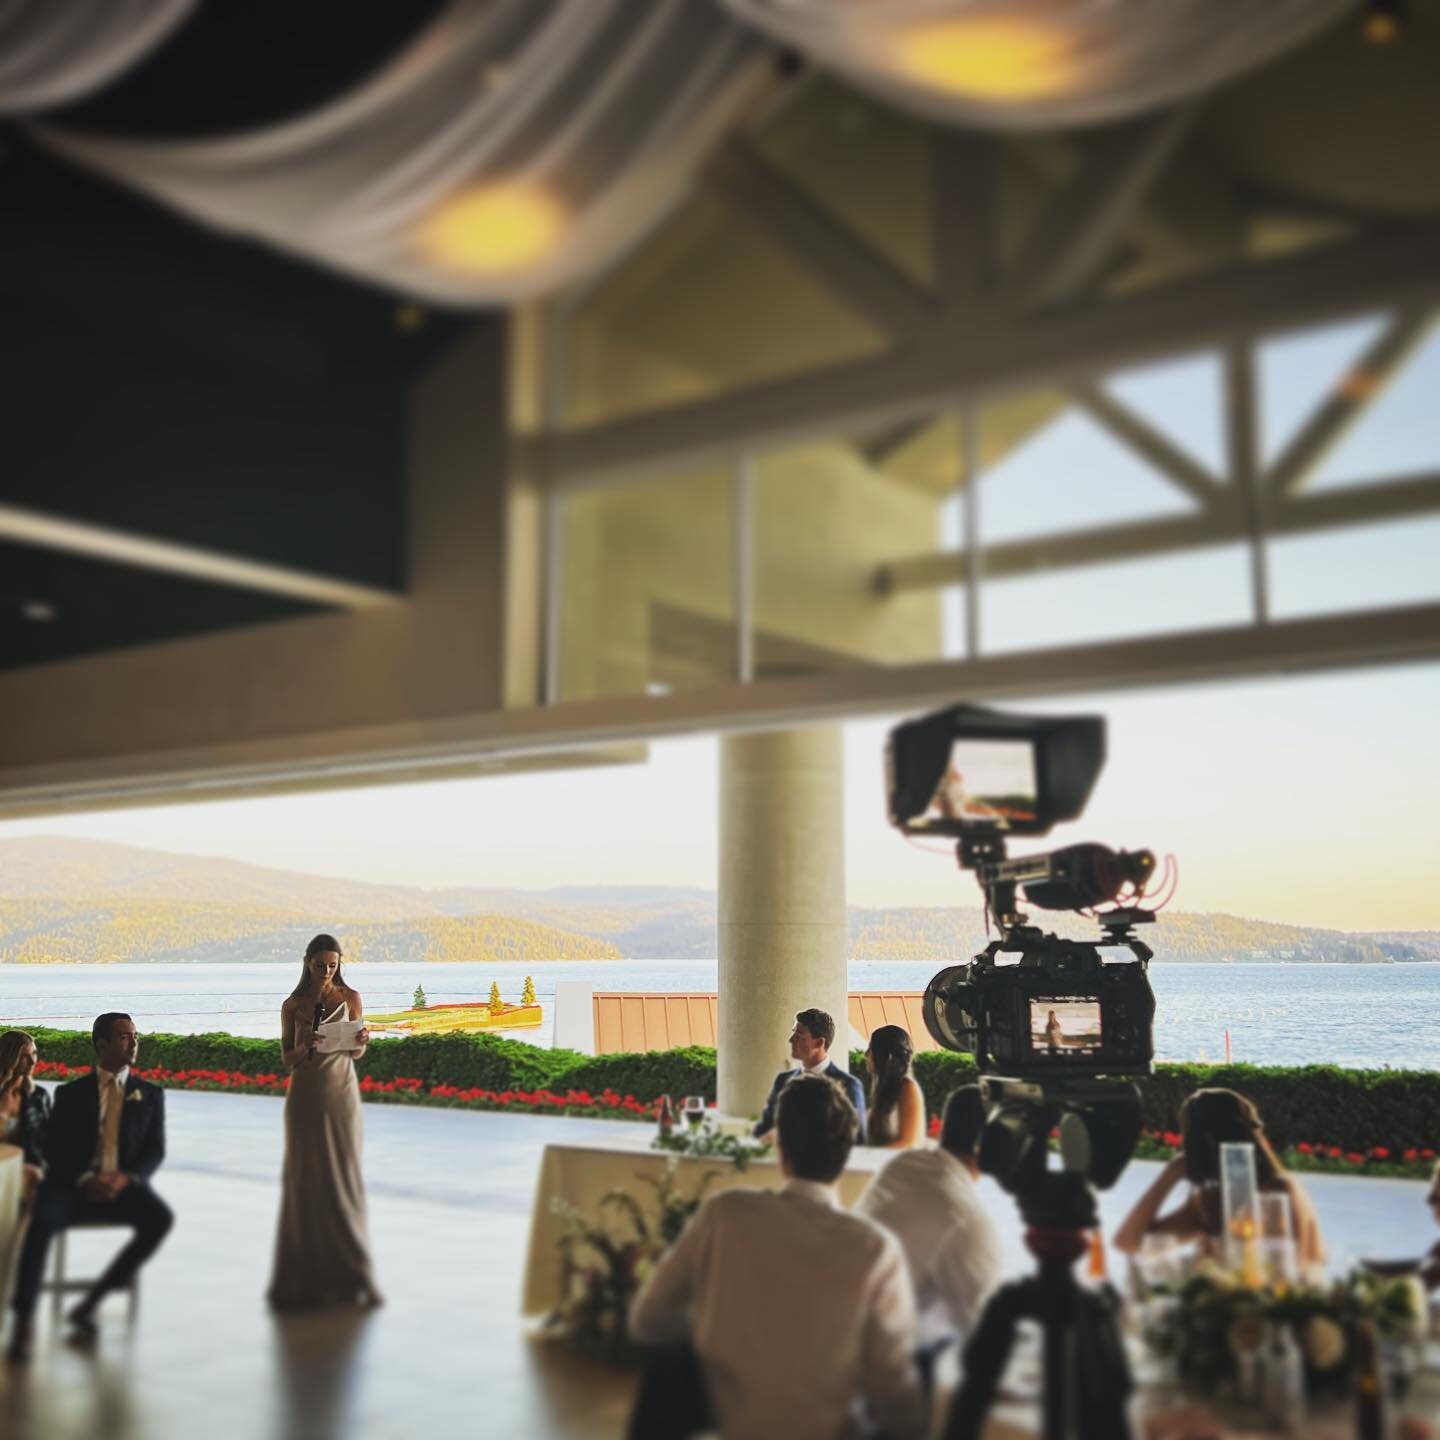 Why Hire a Videographer? 

By a videographer.

For over 12 years I have filmed weddings(that&rsquo;s like 500 years in wedding years lol) and have had the opportunity to film all over the country. The reality is when deciding what is important to you